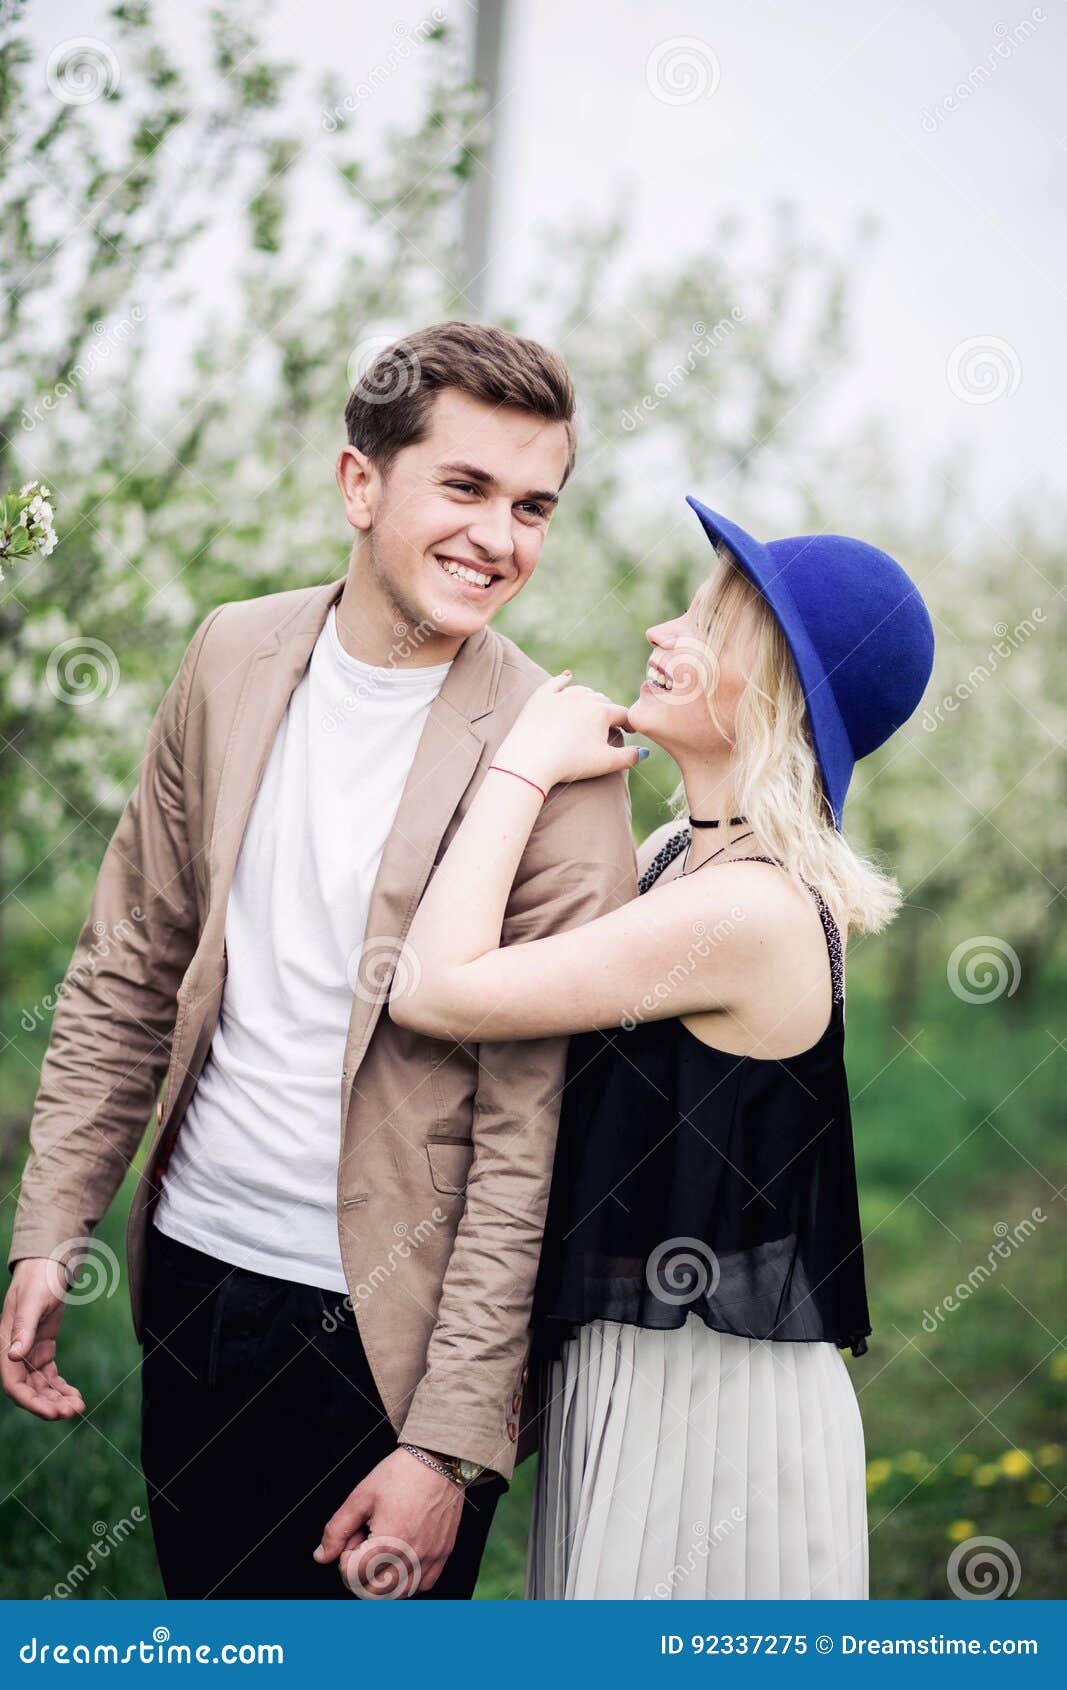 Funny Couple Laughing With A White Perfect Smile And Looking Each Other Outdoors Stock Image